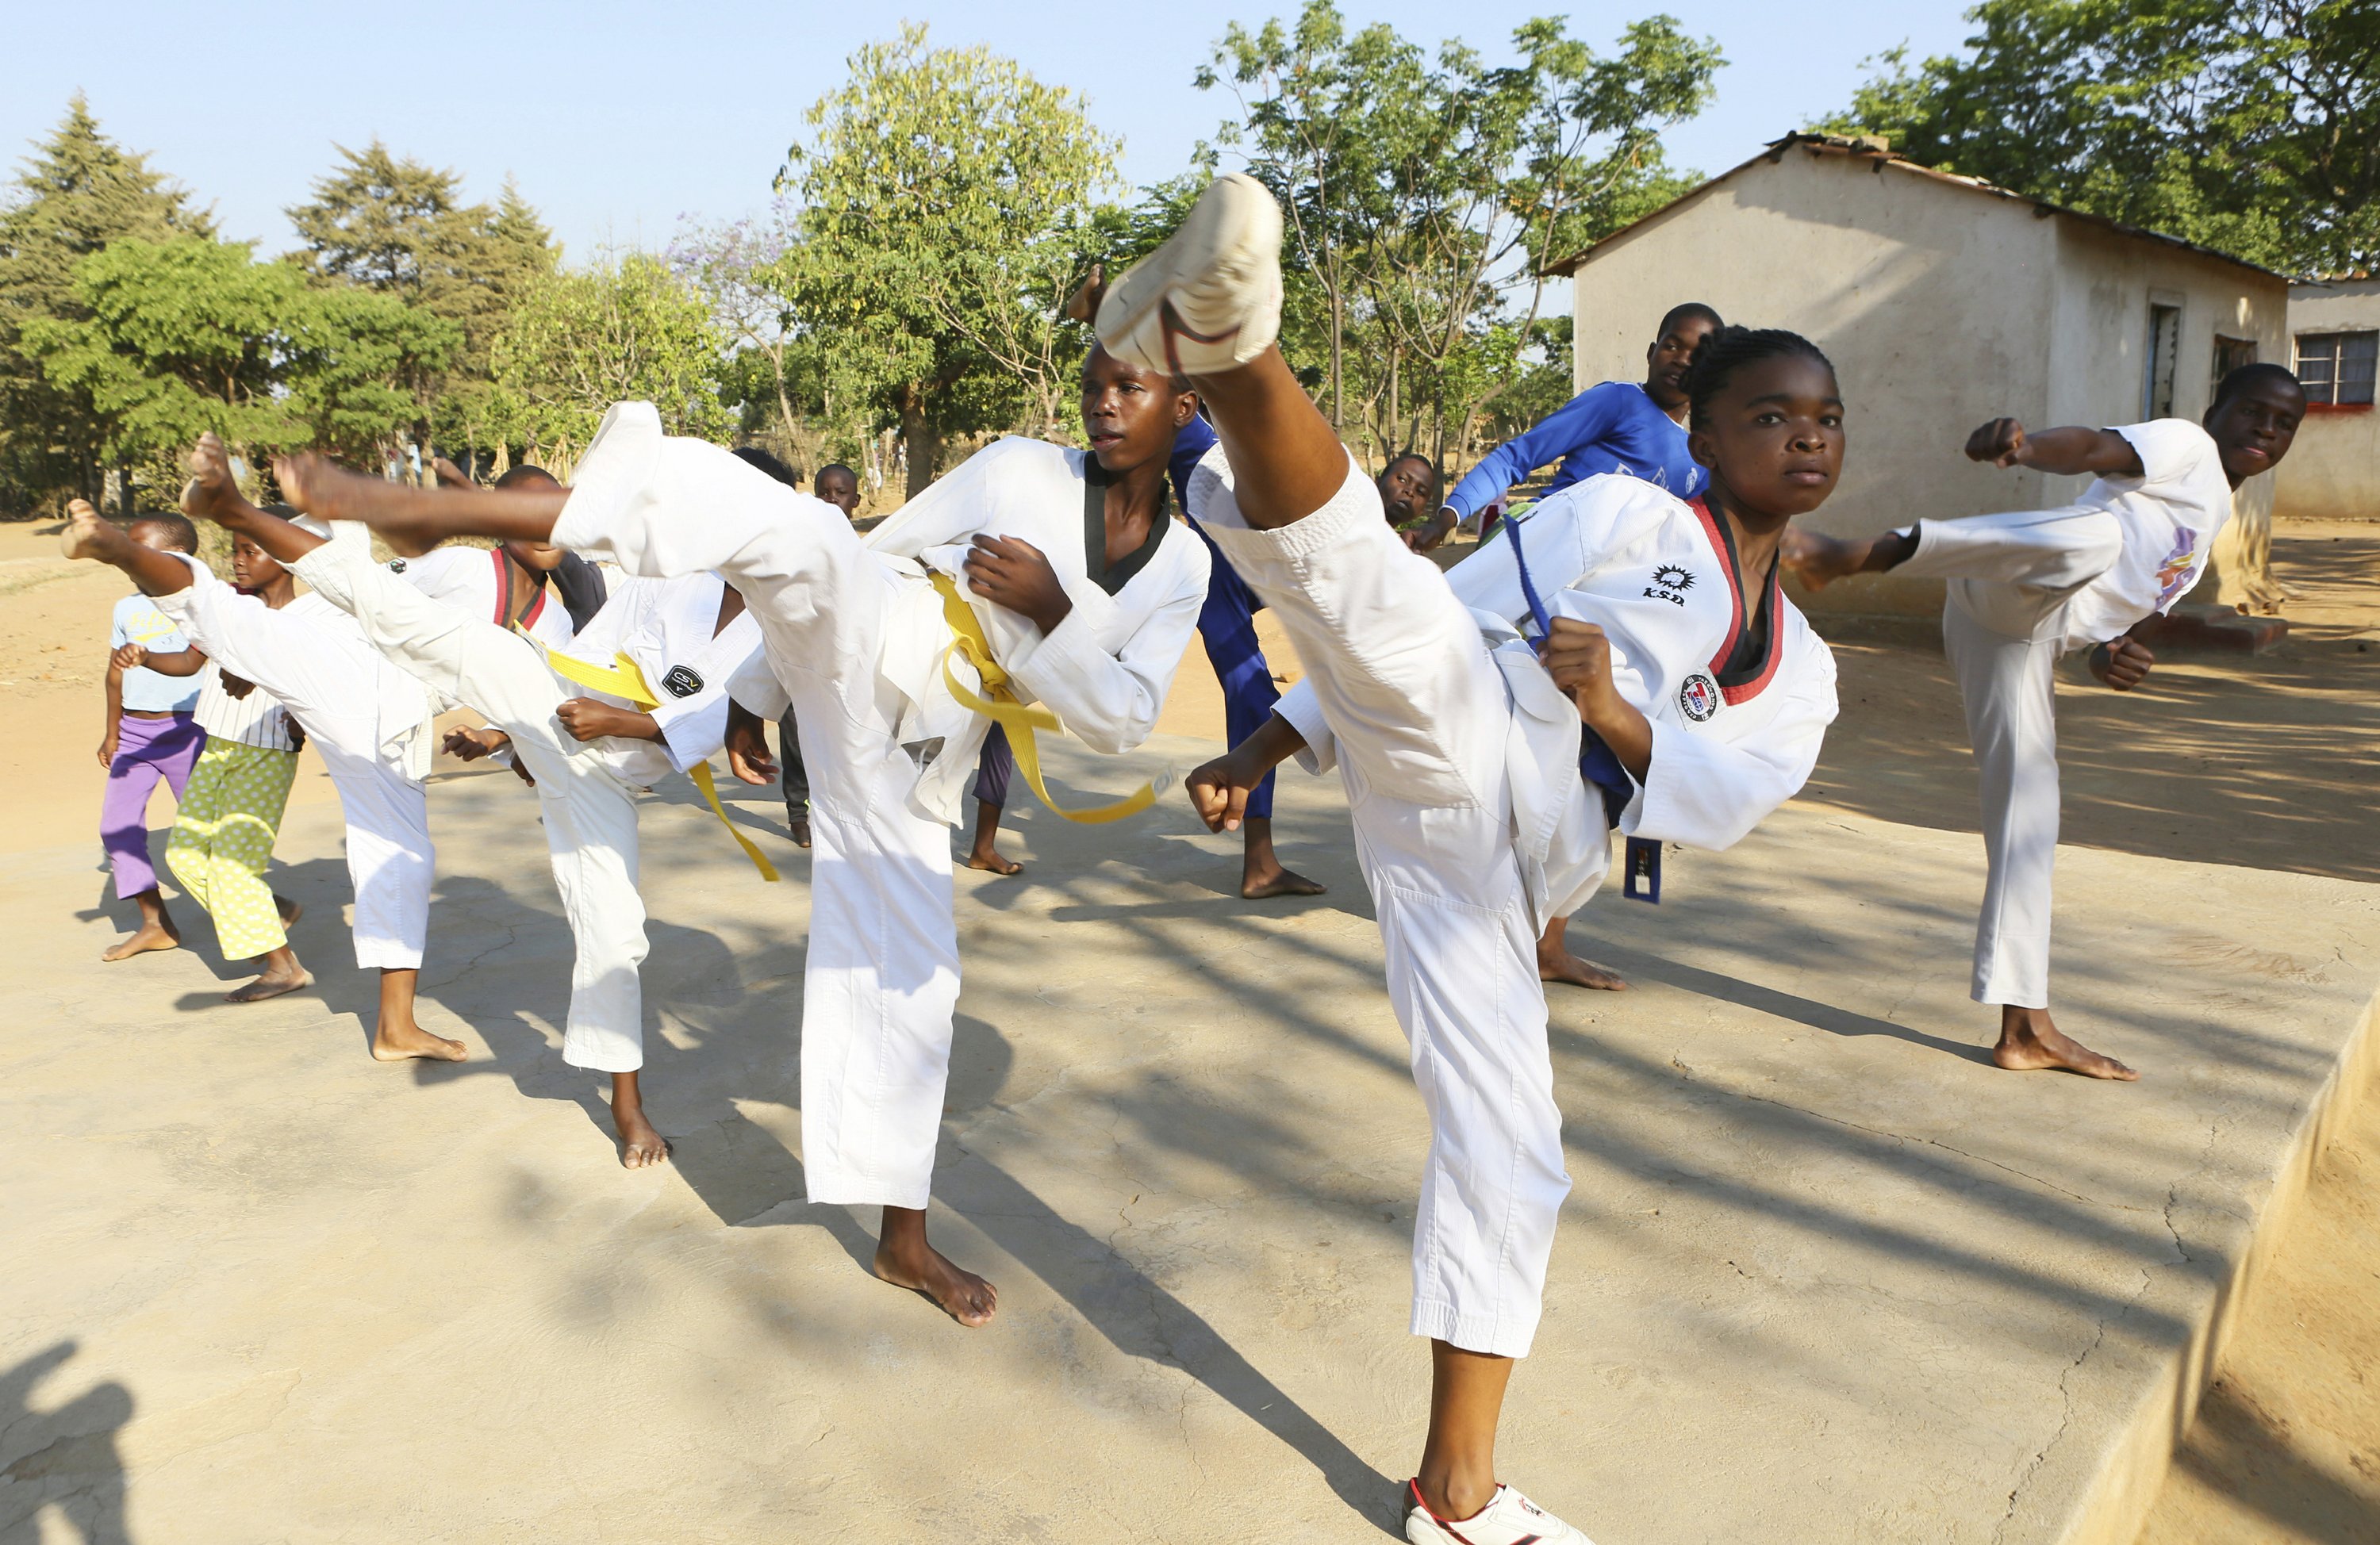 A teenager from Zimbabwe learns taekwondo to fight against children’s marriage